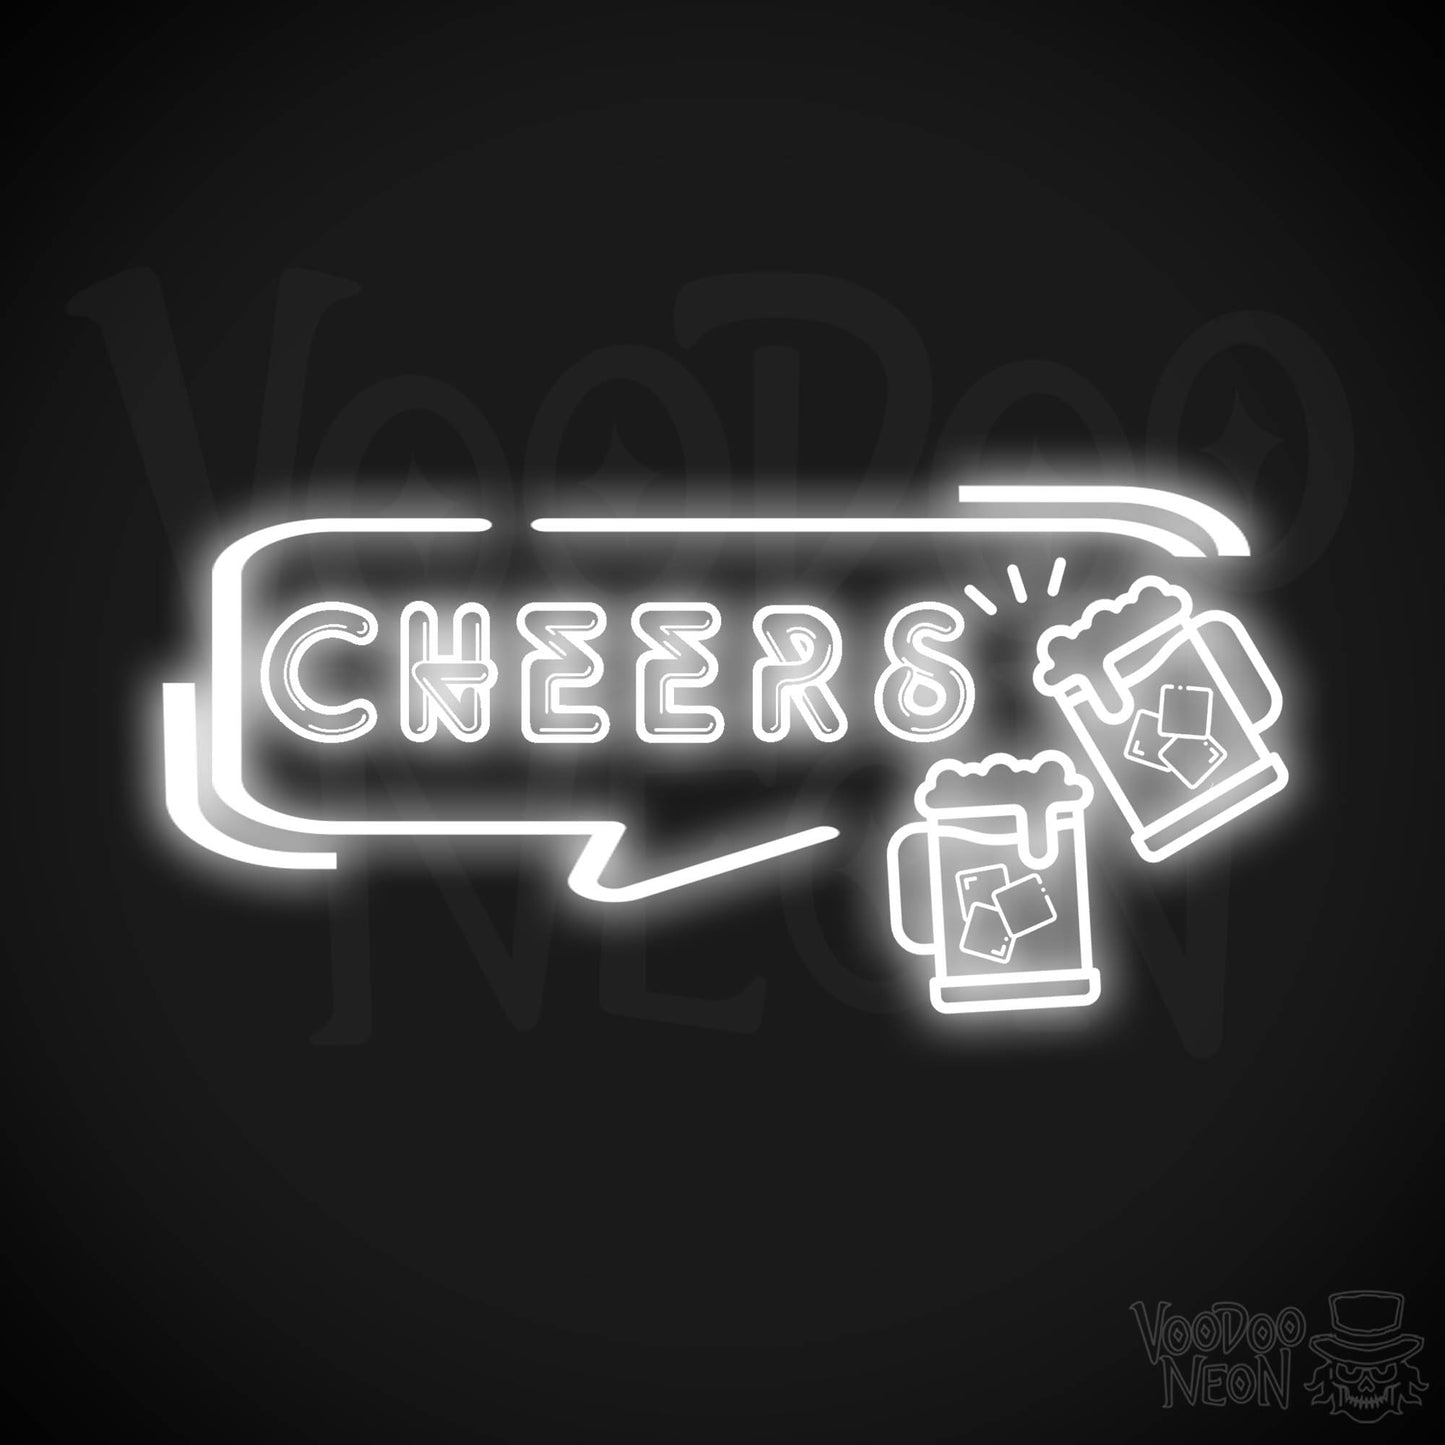 Cheers Neon Sign - Neon Cheers Bar Sign - LED Neon Wall Art - Color White